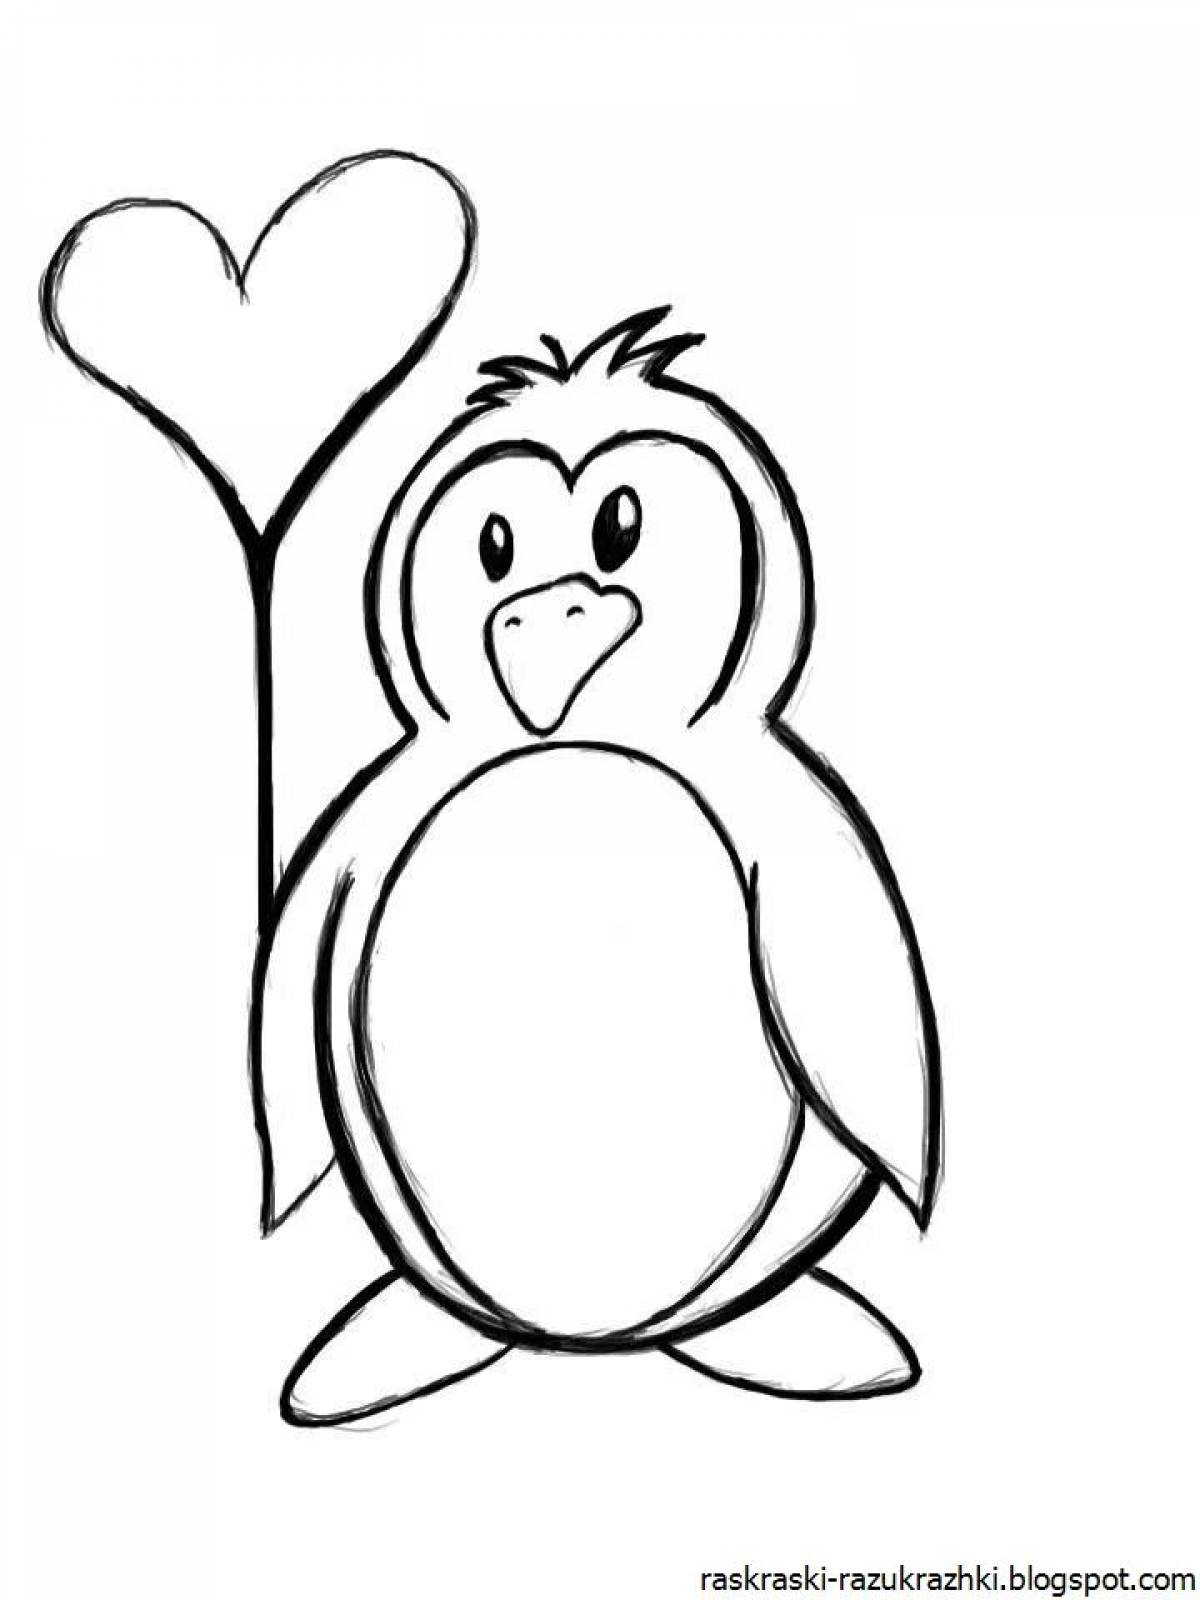 Awesome penguin coloring pages for kids